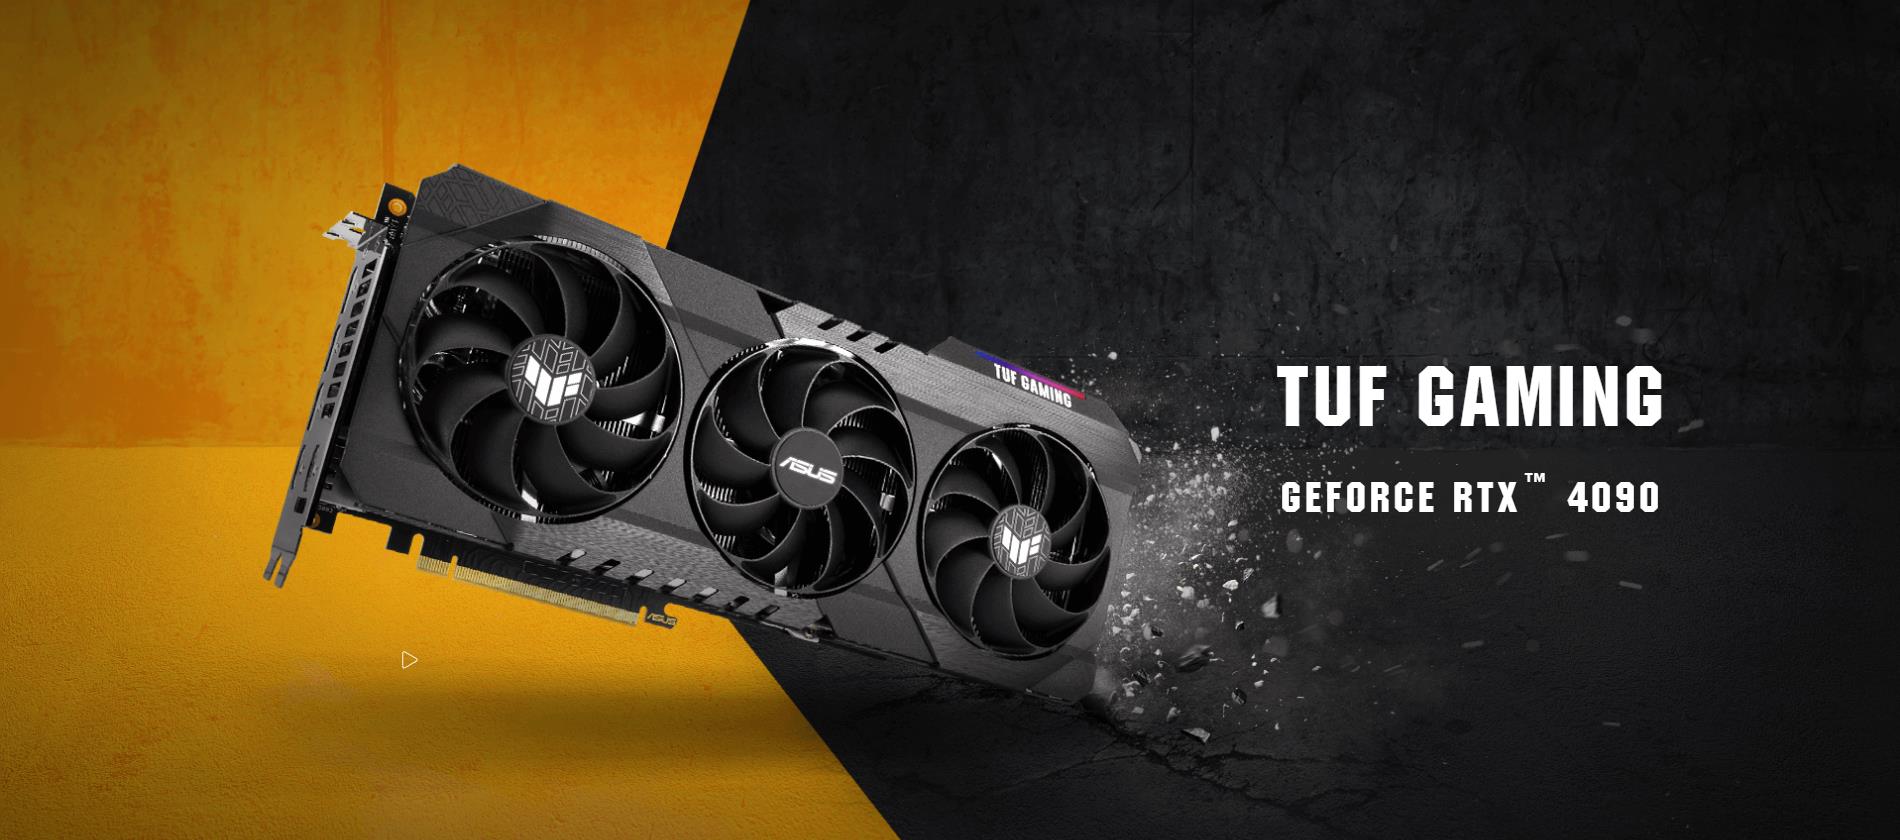 A large marketing image providing additional information about the product ASUS GeForce RTX 4090 TUF Gaming OG OC 24GB GDDR6X - Additional alt info not provided